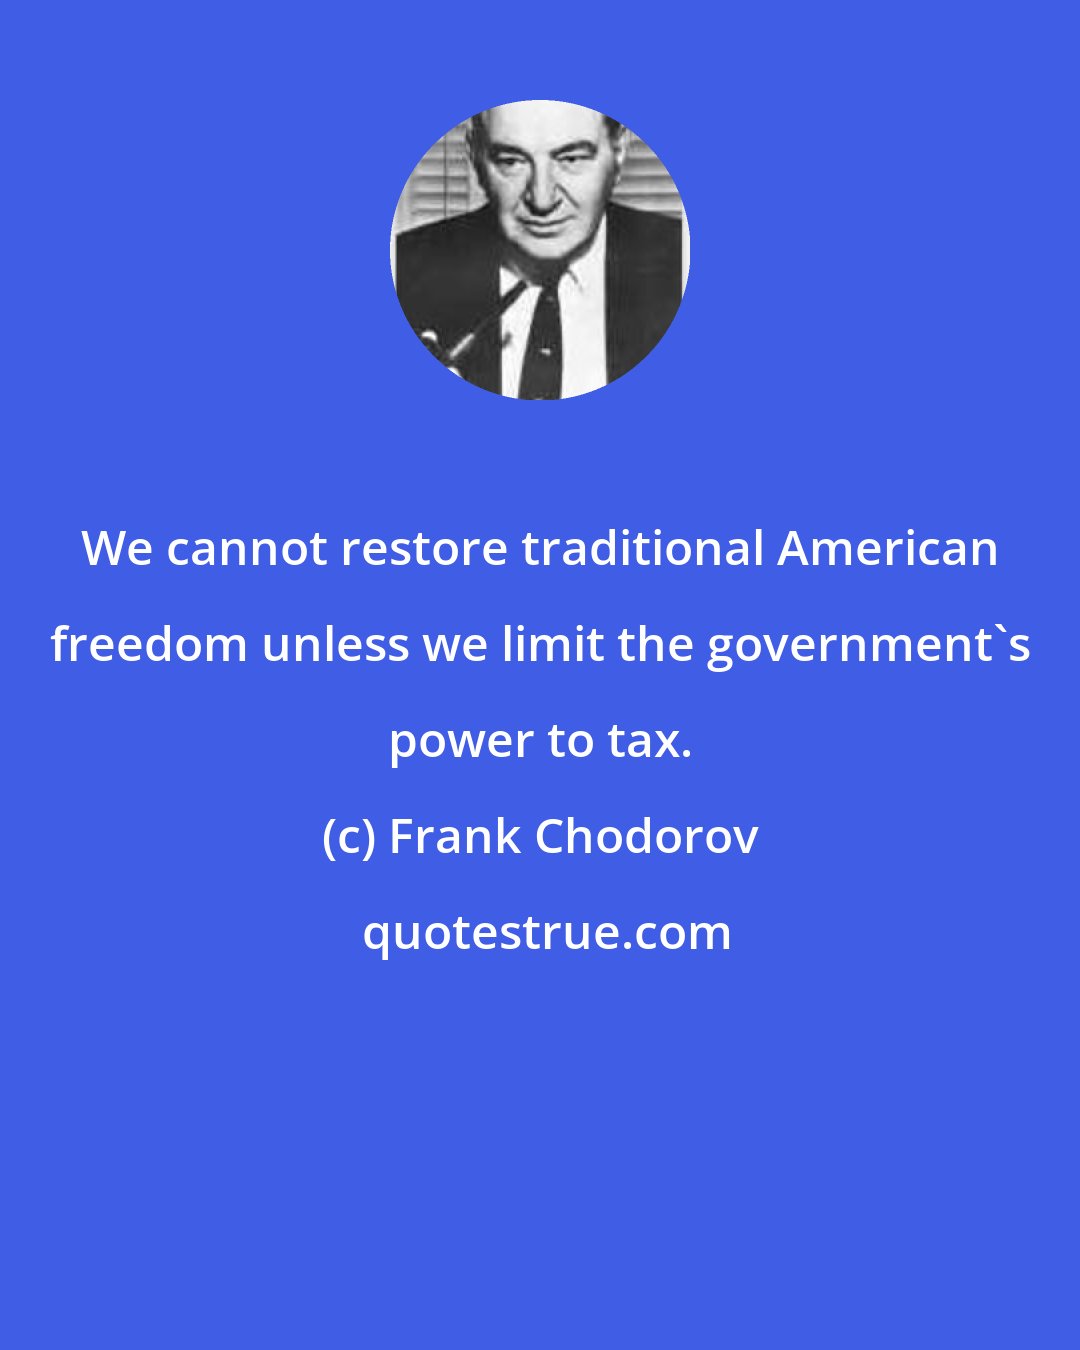 Frank Chodorov: We cannot restore traditional American freedom unless we limit the government's power to tax.